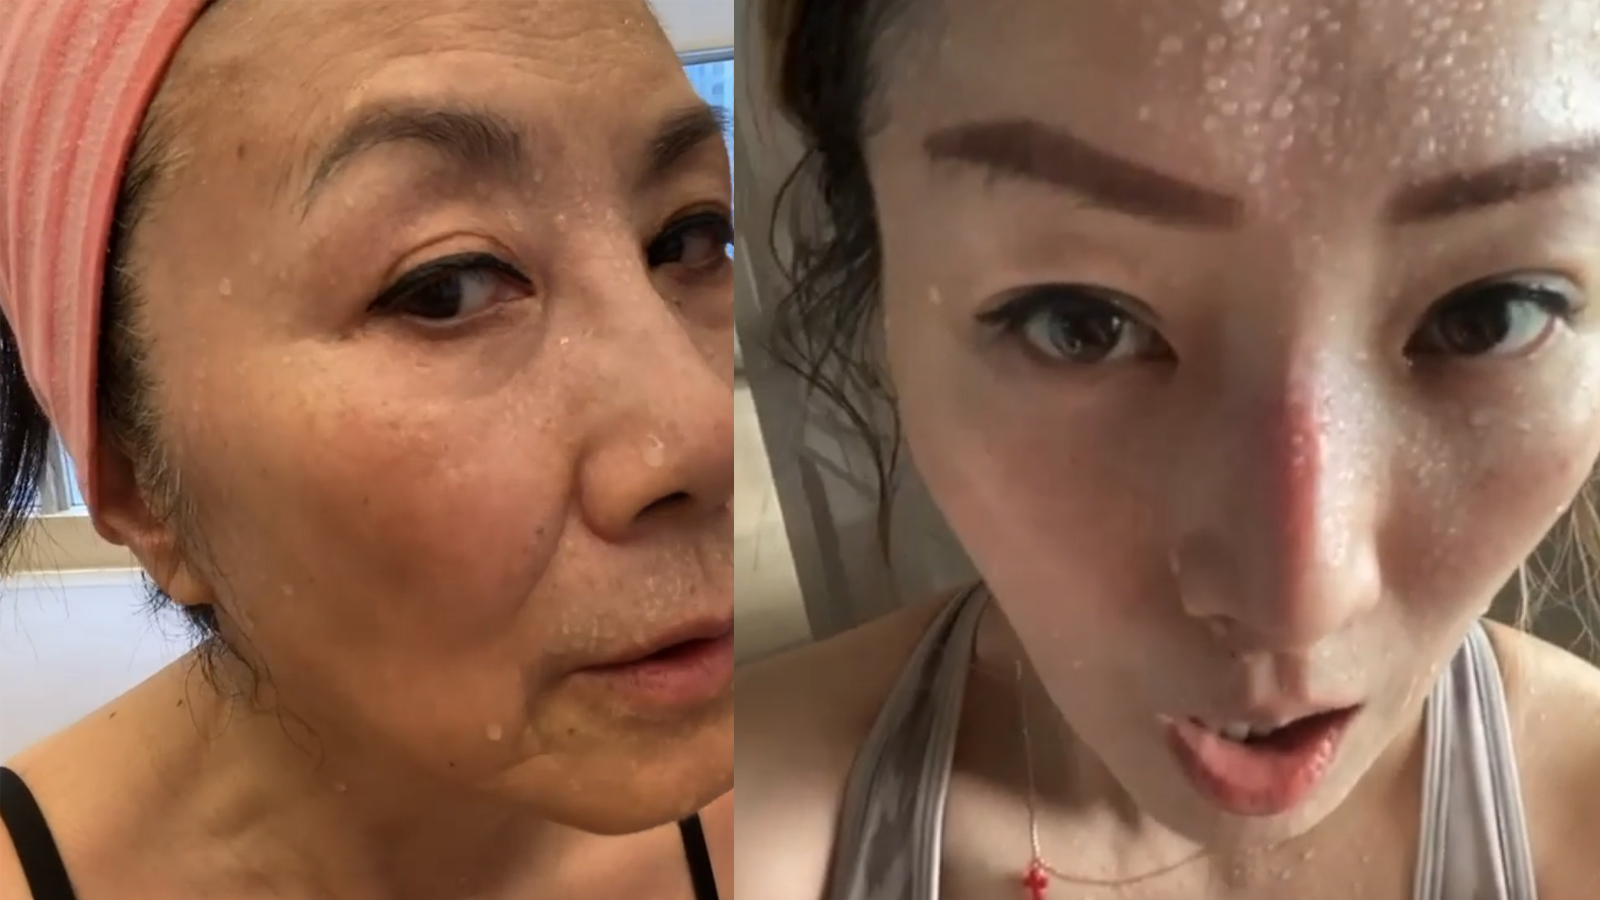 Grandma, 80, SHOCKS fans on TikTok with her AGELESS appearance and